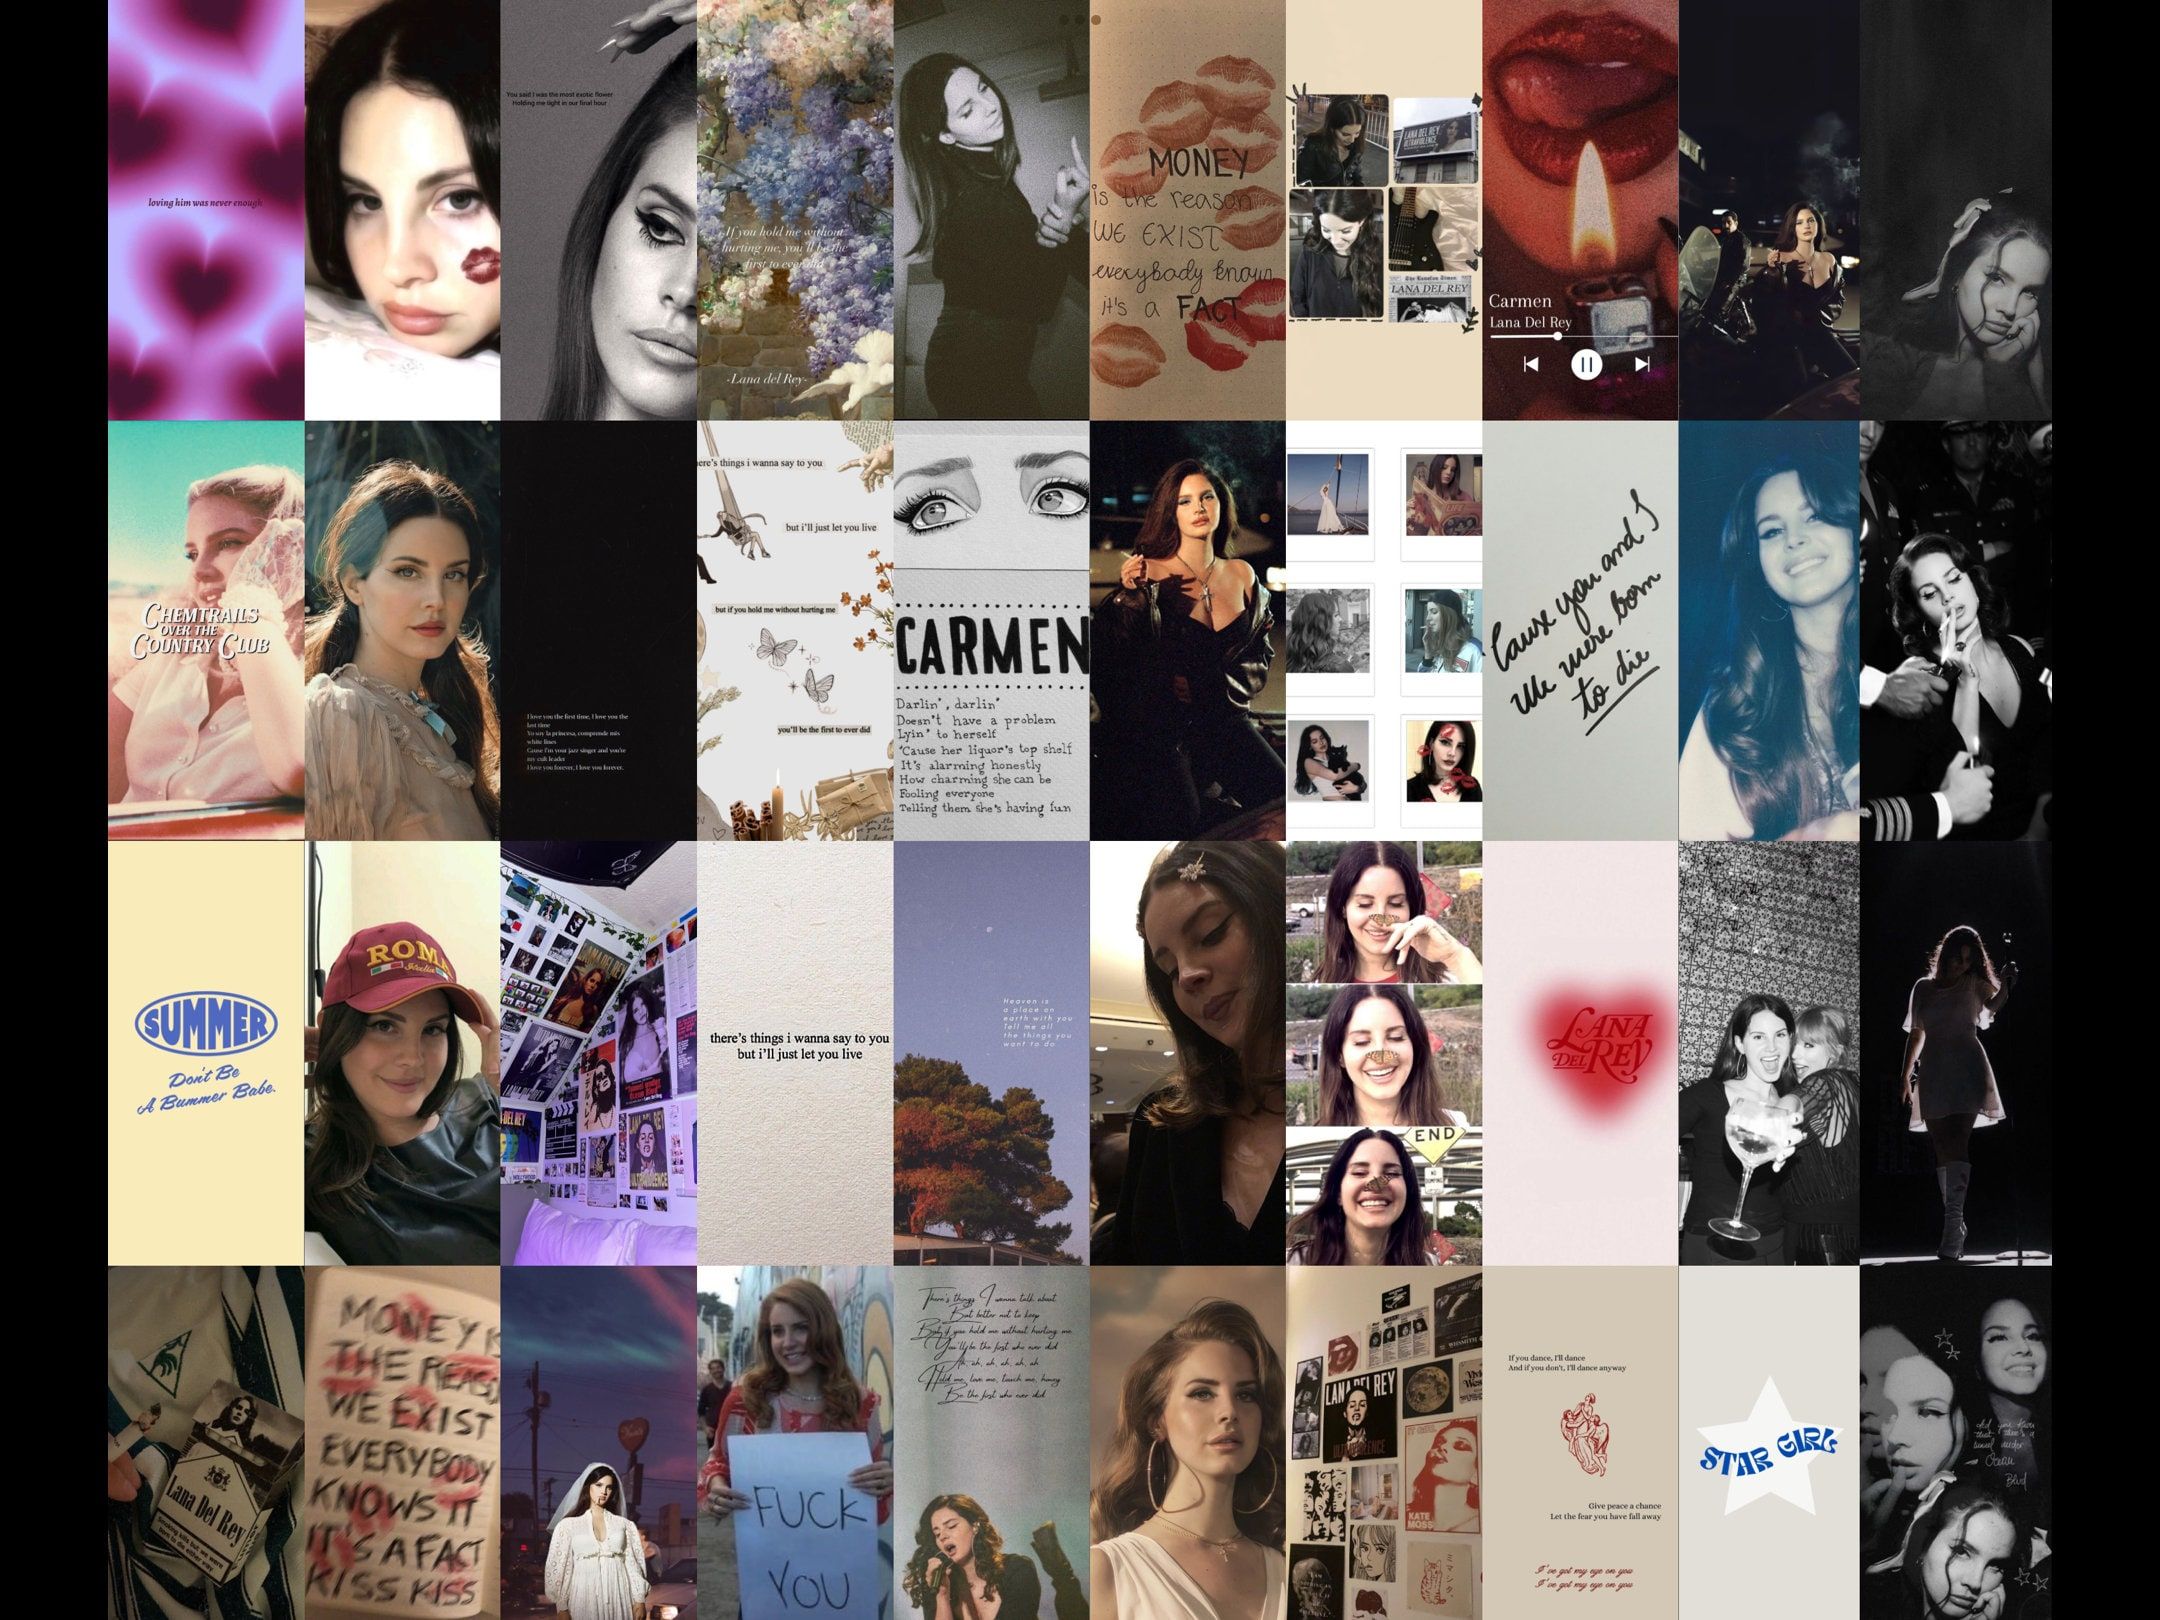 Collage of images of the author, her friends, and her experiences. - Lana Del Rey